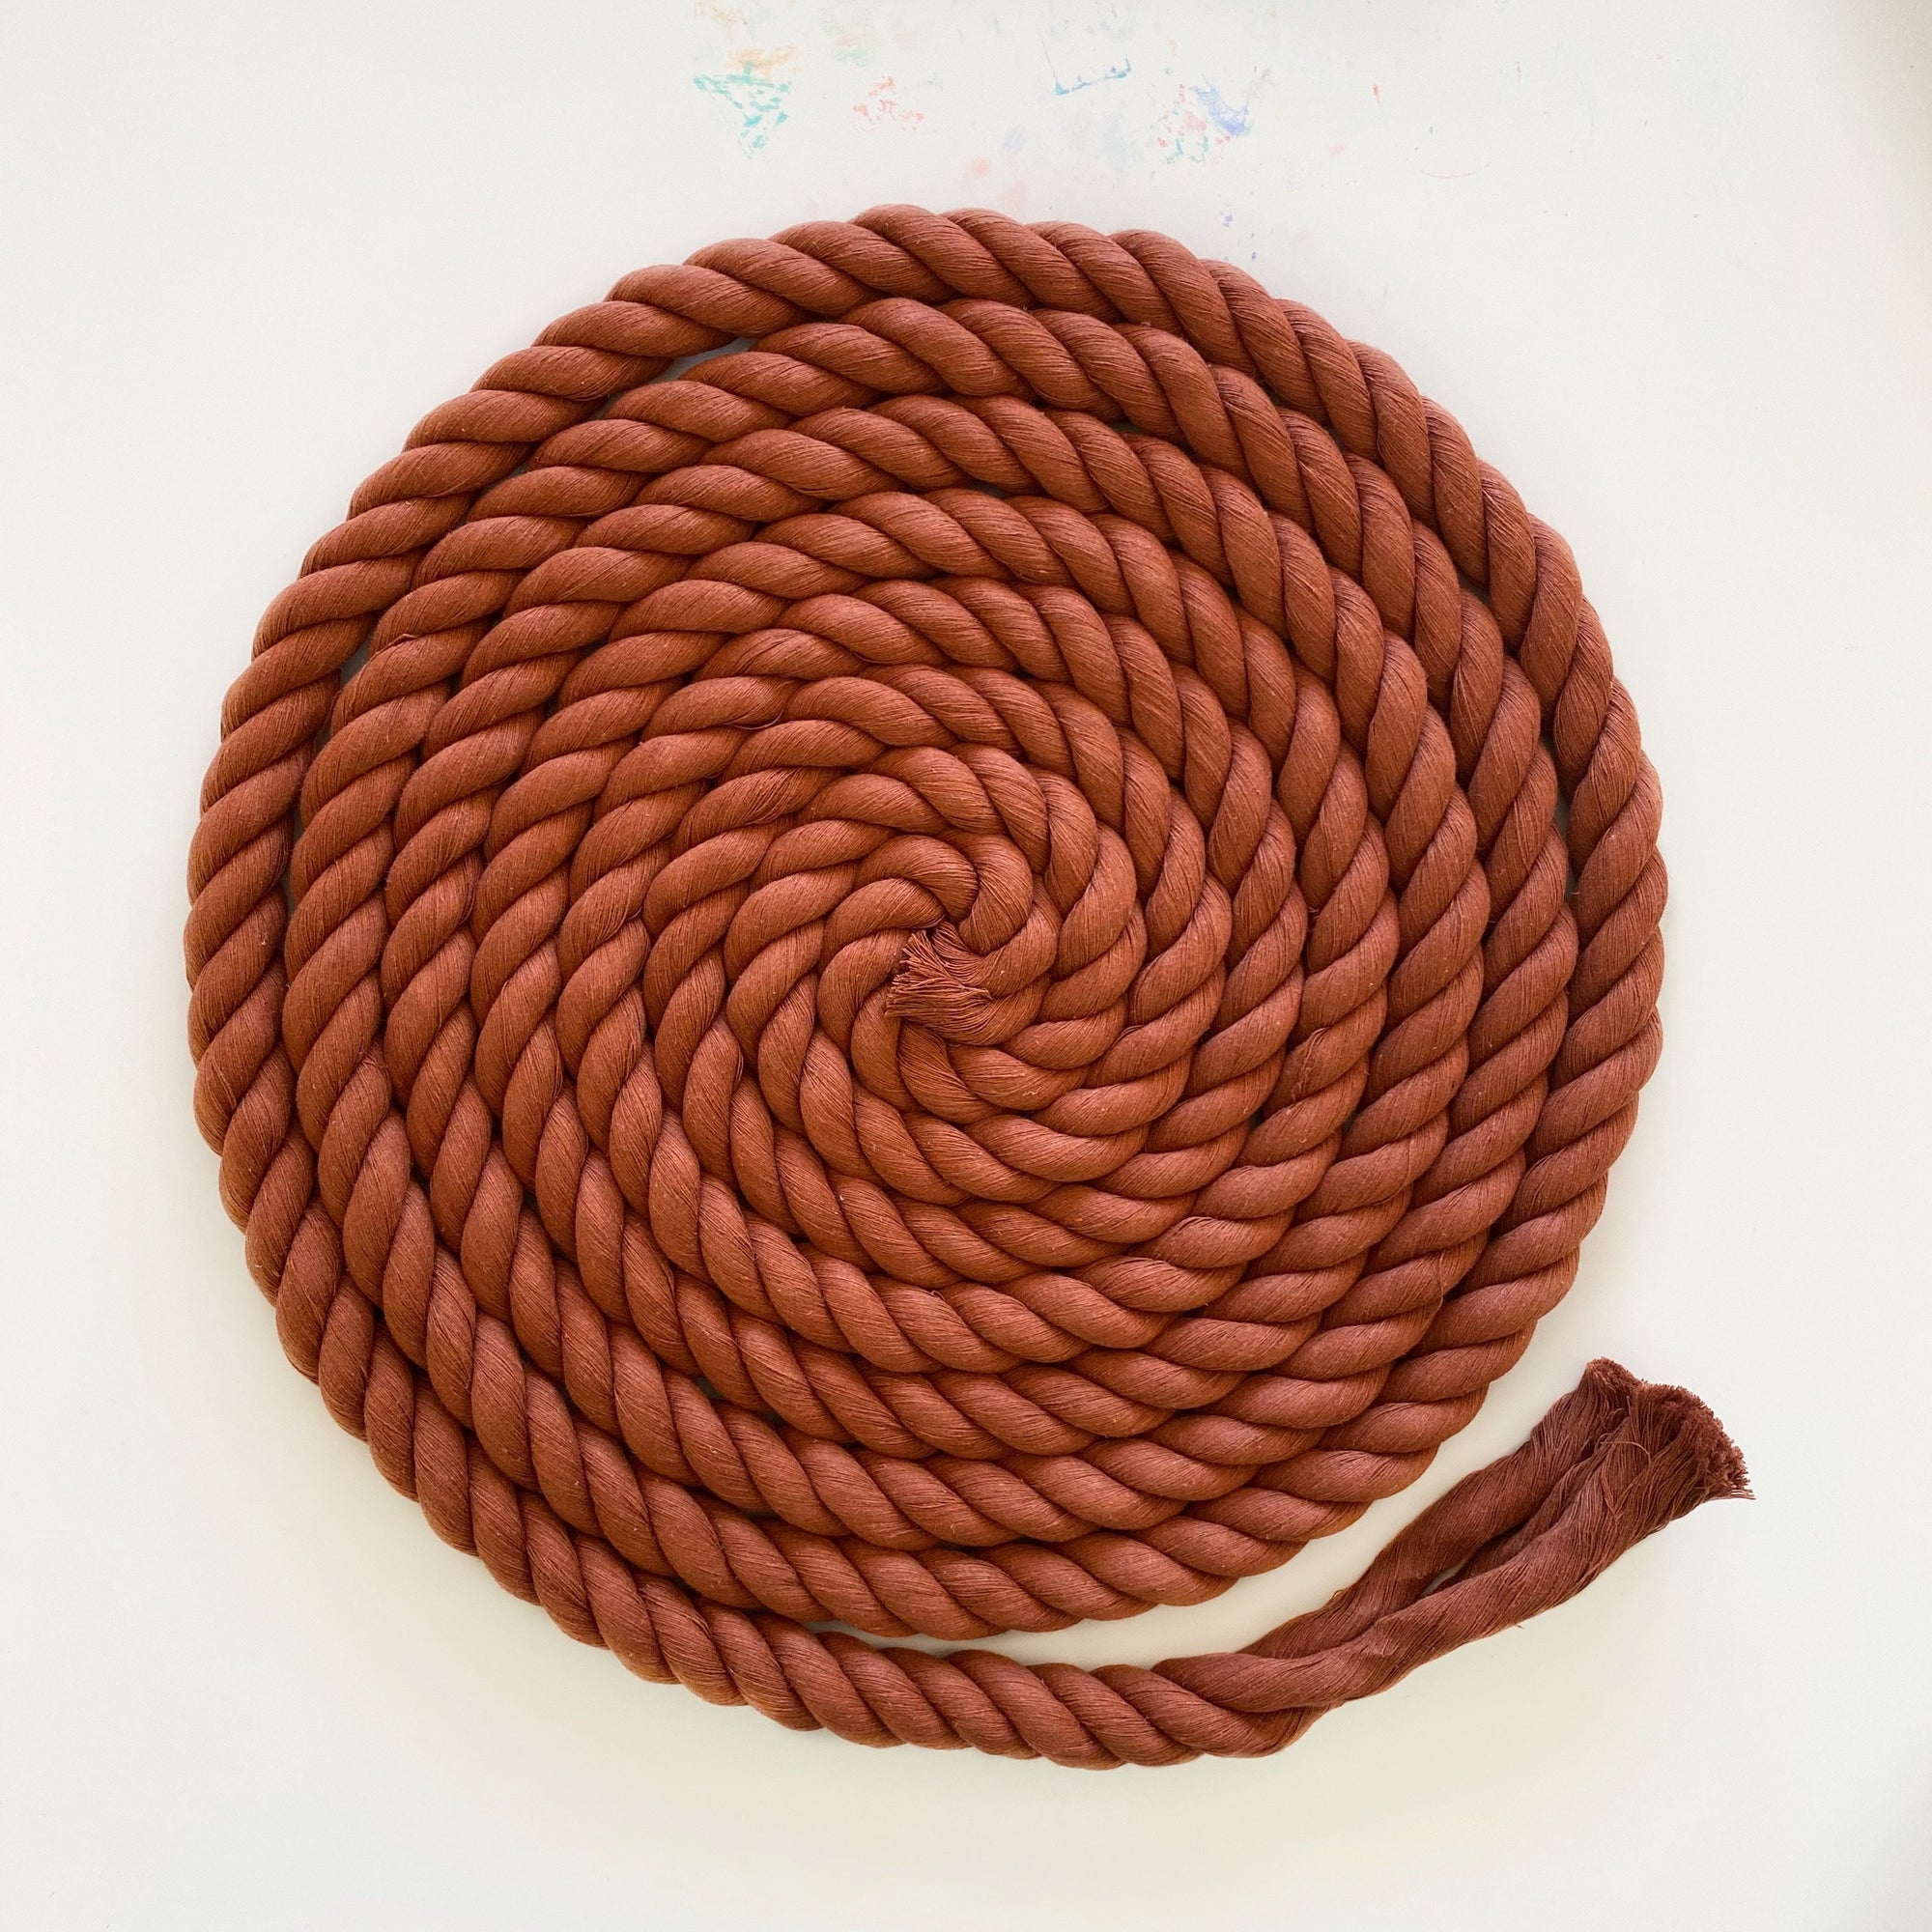 Mary Maker Studio 3Ply Twisted Rope Rust 1m 20mm Coloured Macrame Rope macrame cotton macrame rope macrame workshop macrame patterns macrame